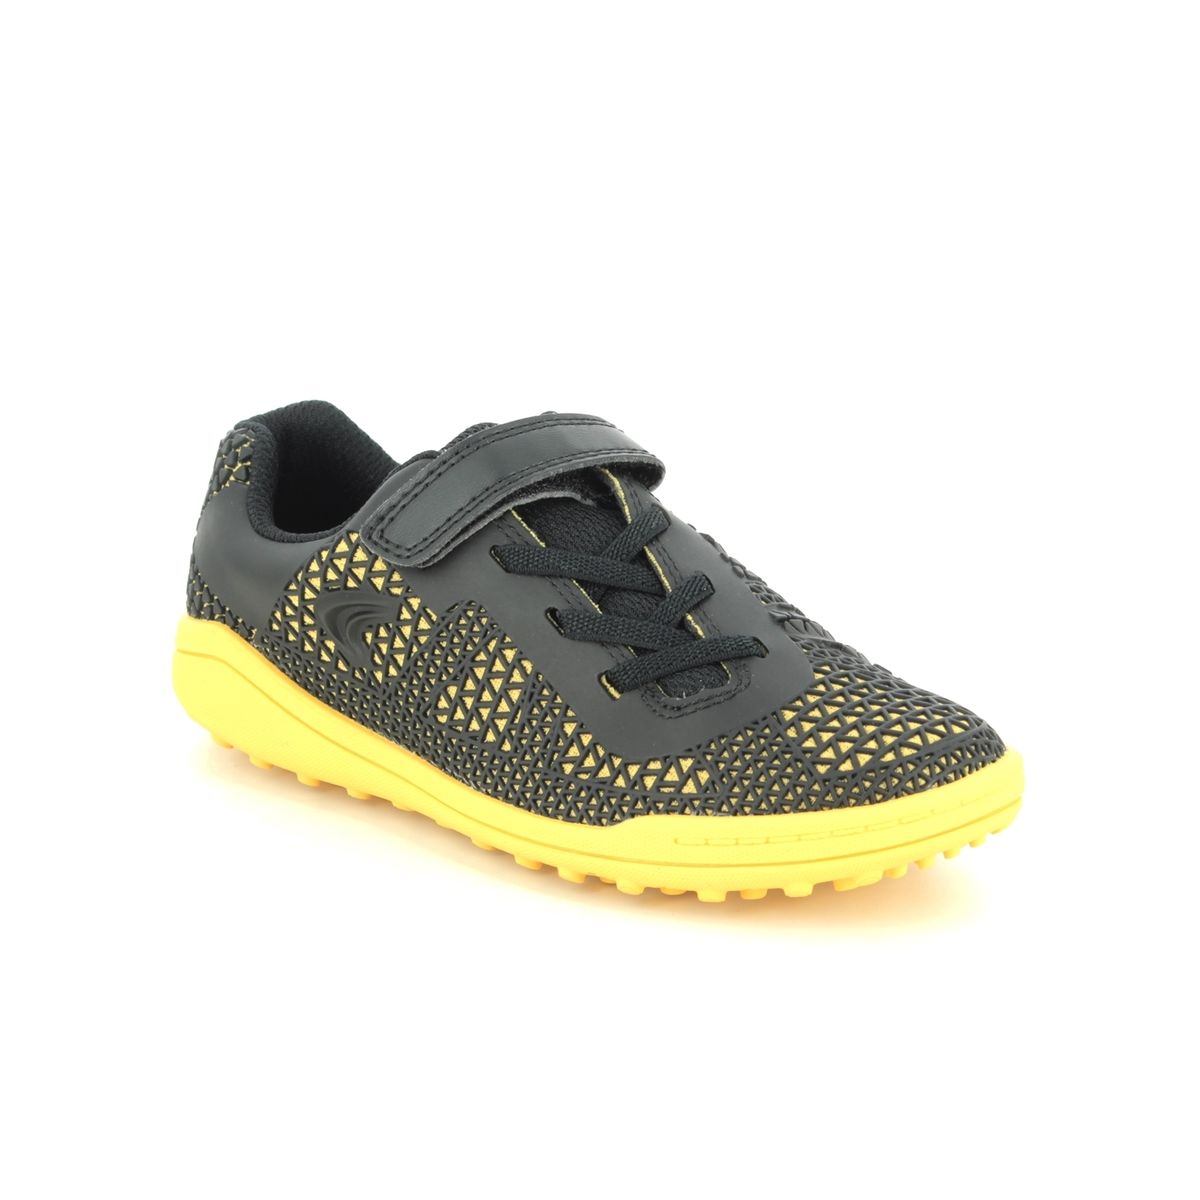 Clarks Award Swift K Black Yellow Kids Boys Trainers 5391-86F in a Plain Man-made in Size 13